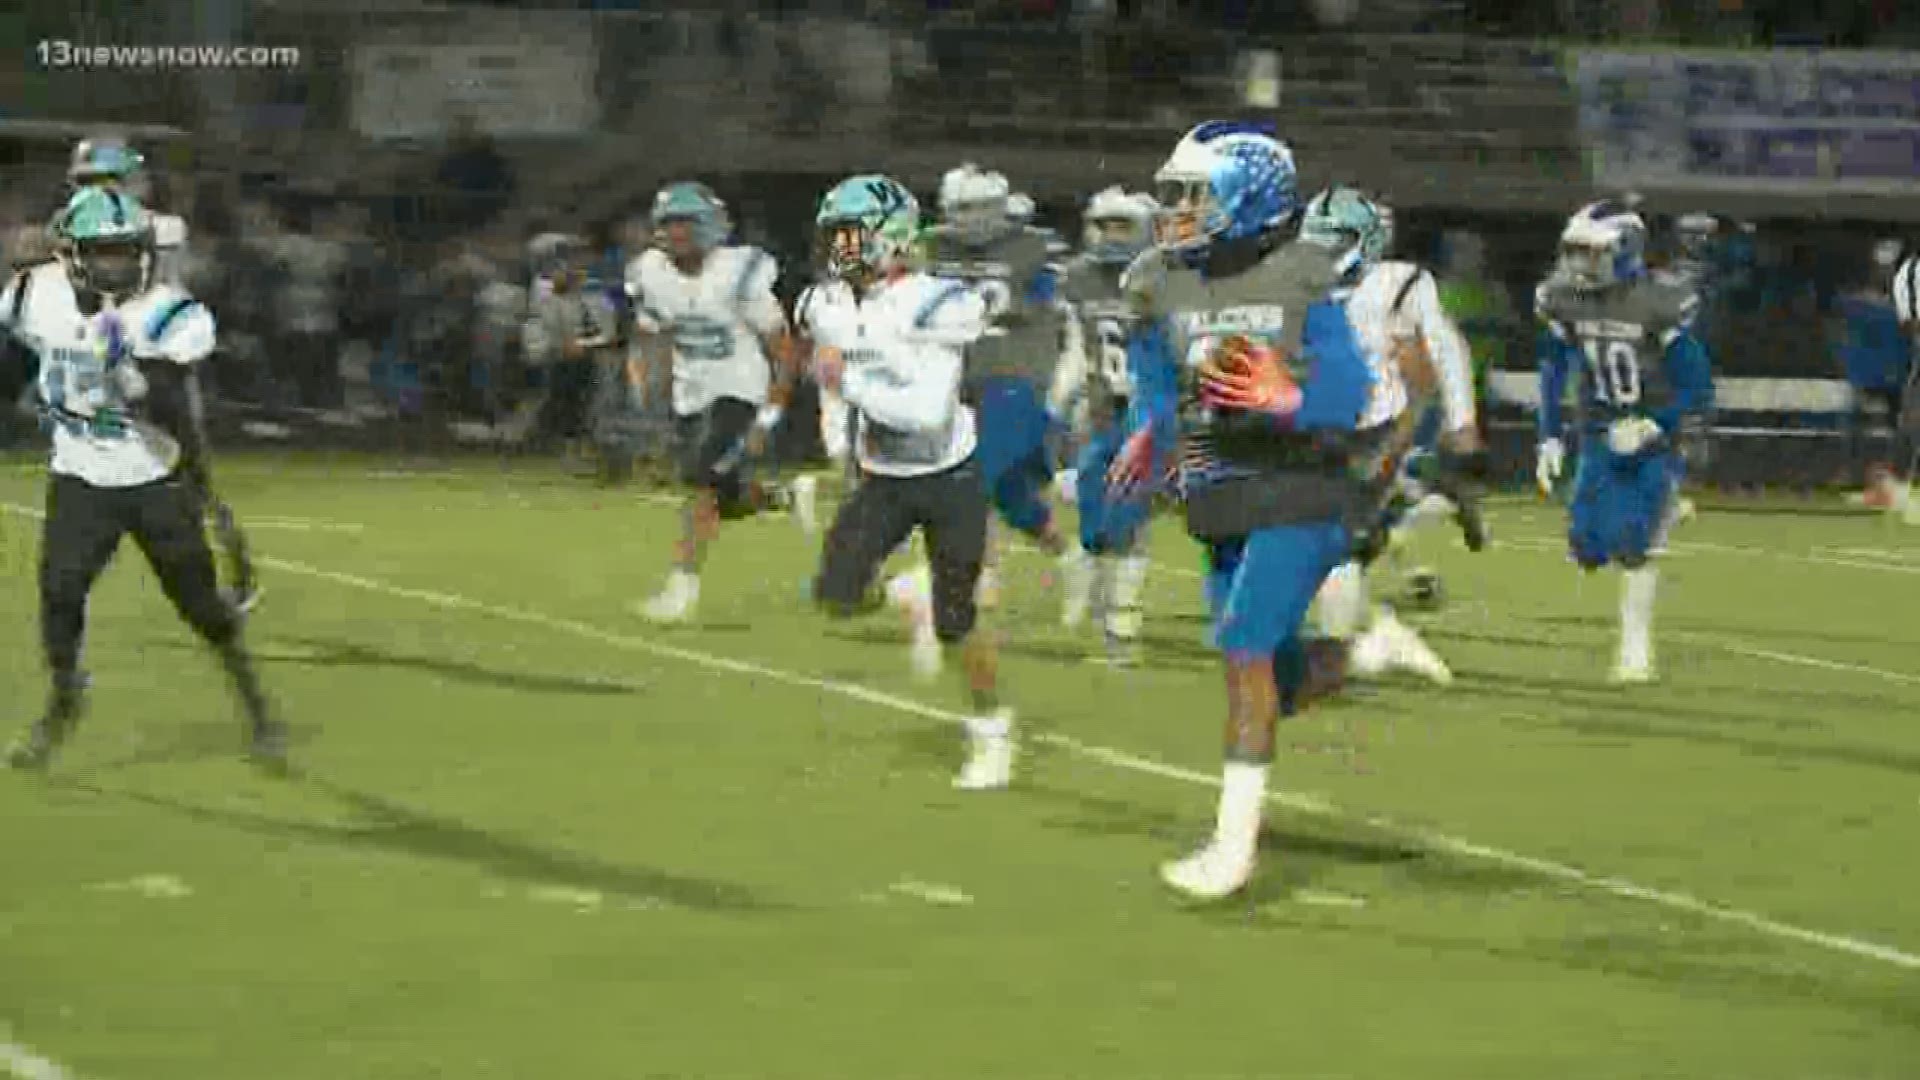 Among the winners Cox, Princess Anne and in the Game Of The Week, York beat Warhill 35-28.